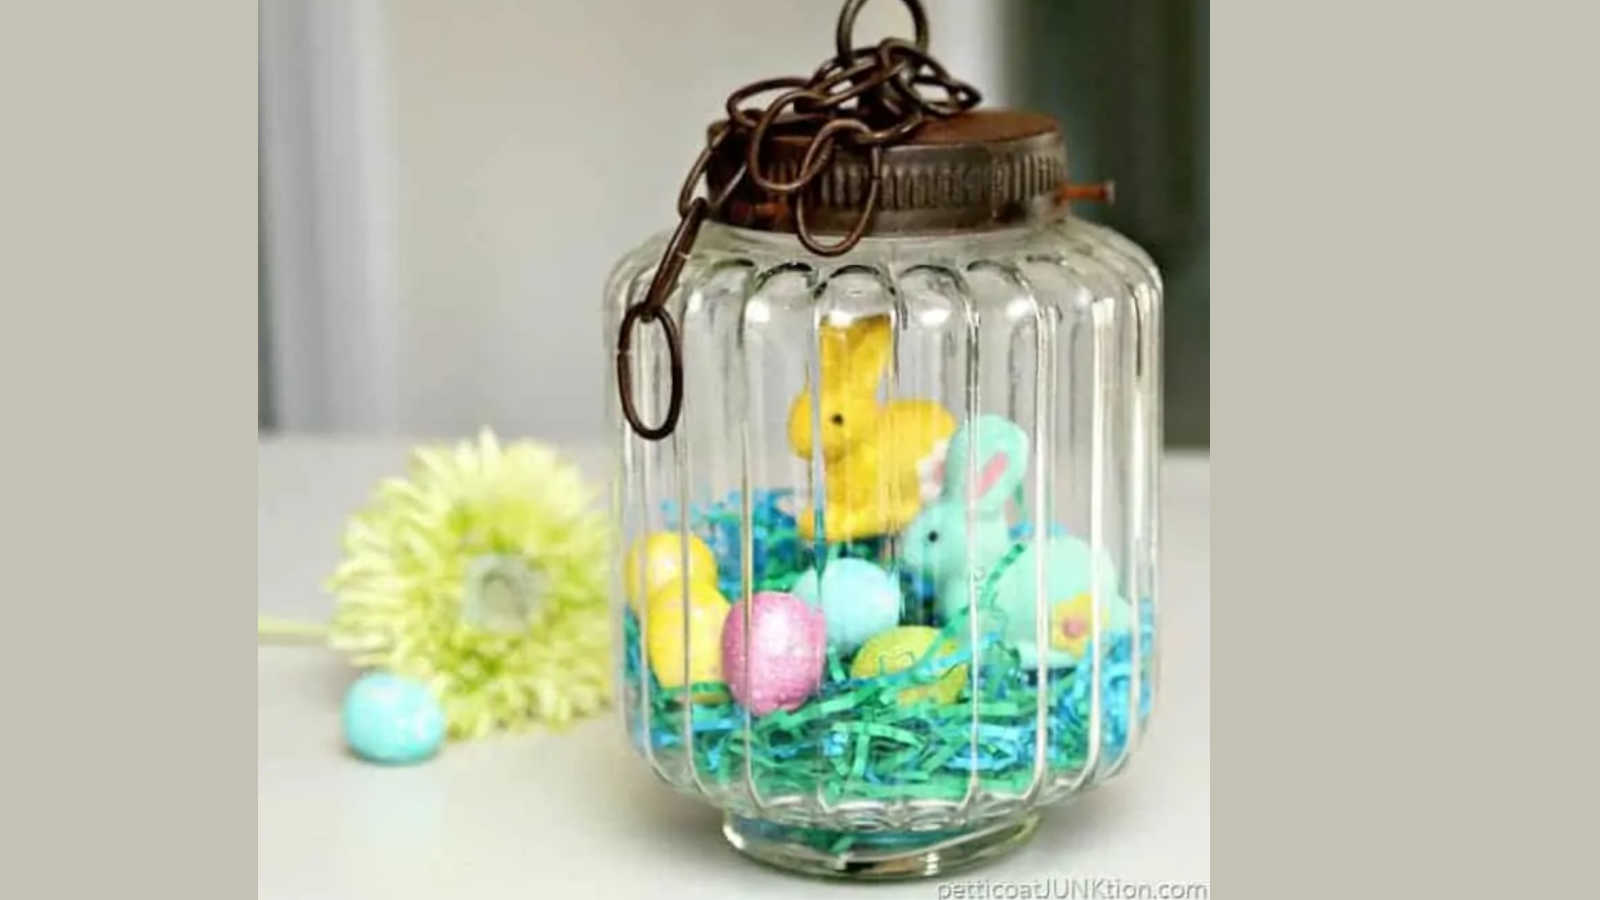 easter decor in a vintage light fixture